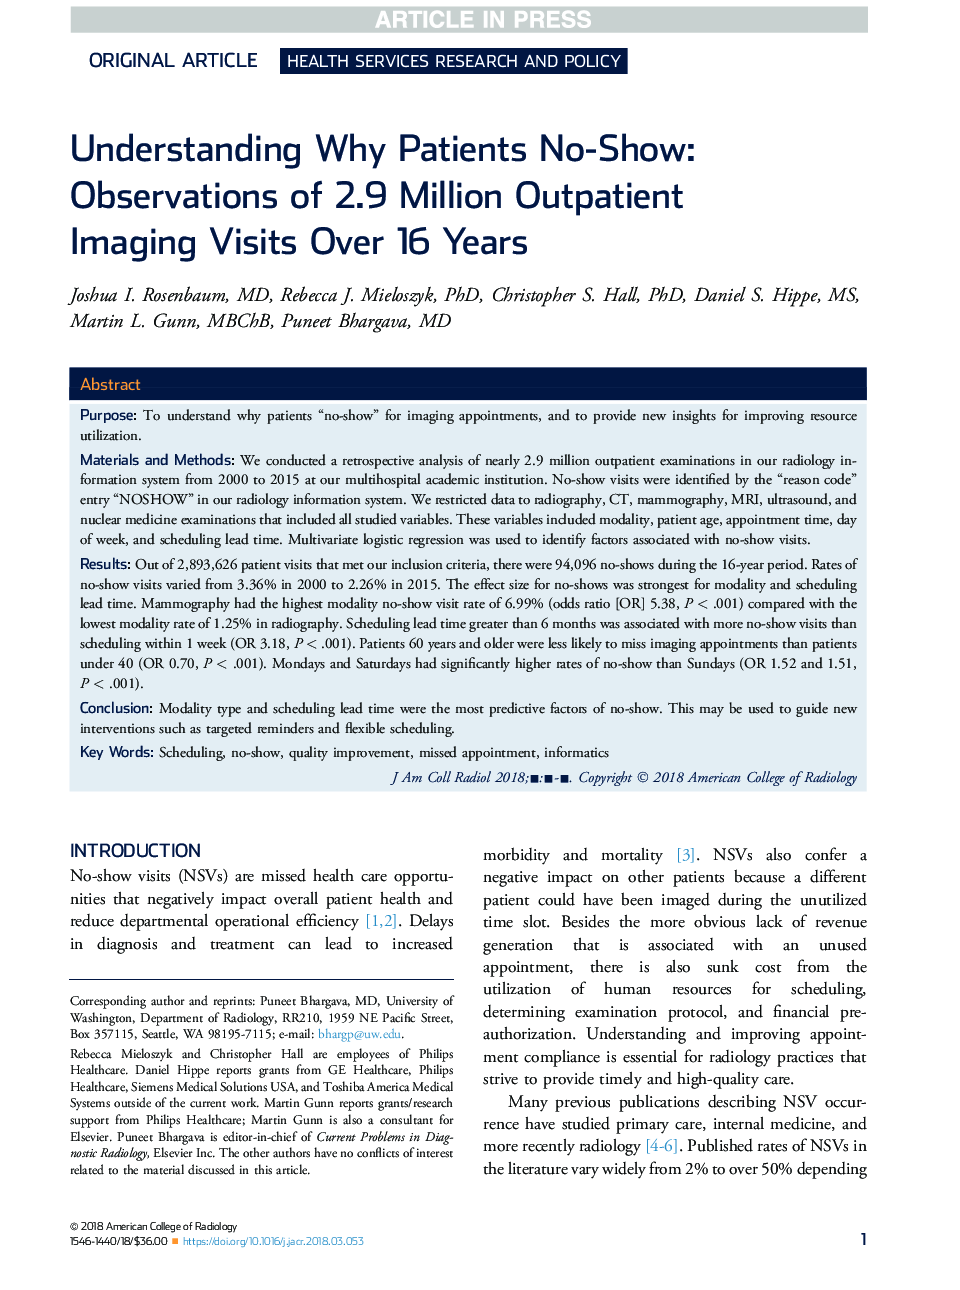 Understanding Why Patients No-Show: Observations of 2.9 Million Outpatient Imaging Visits Over 16 Years